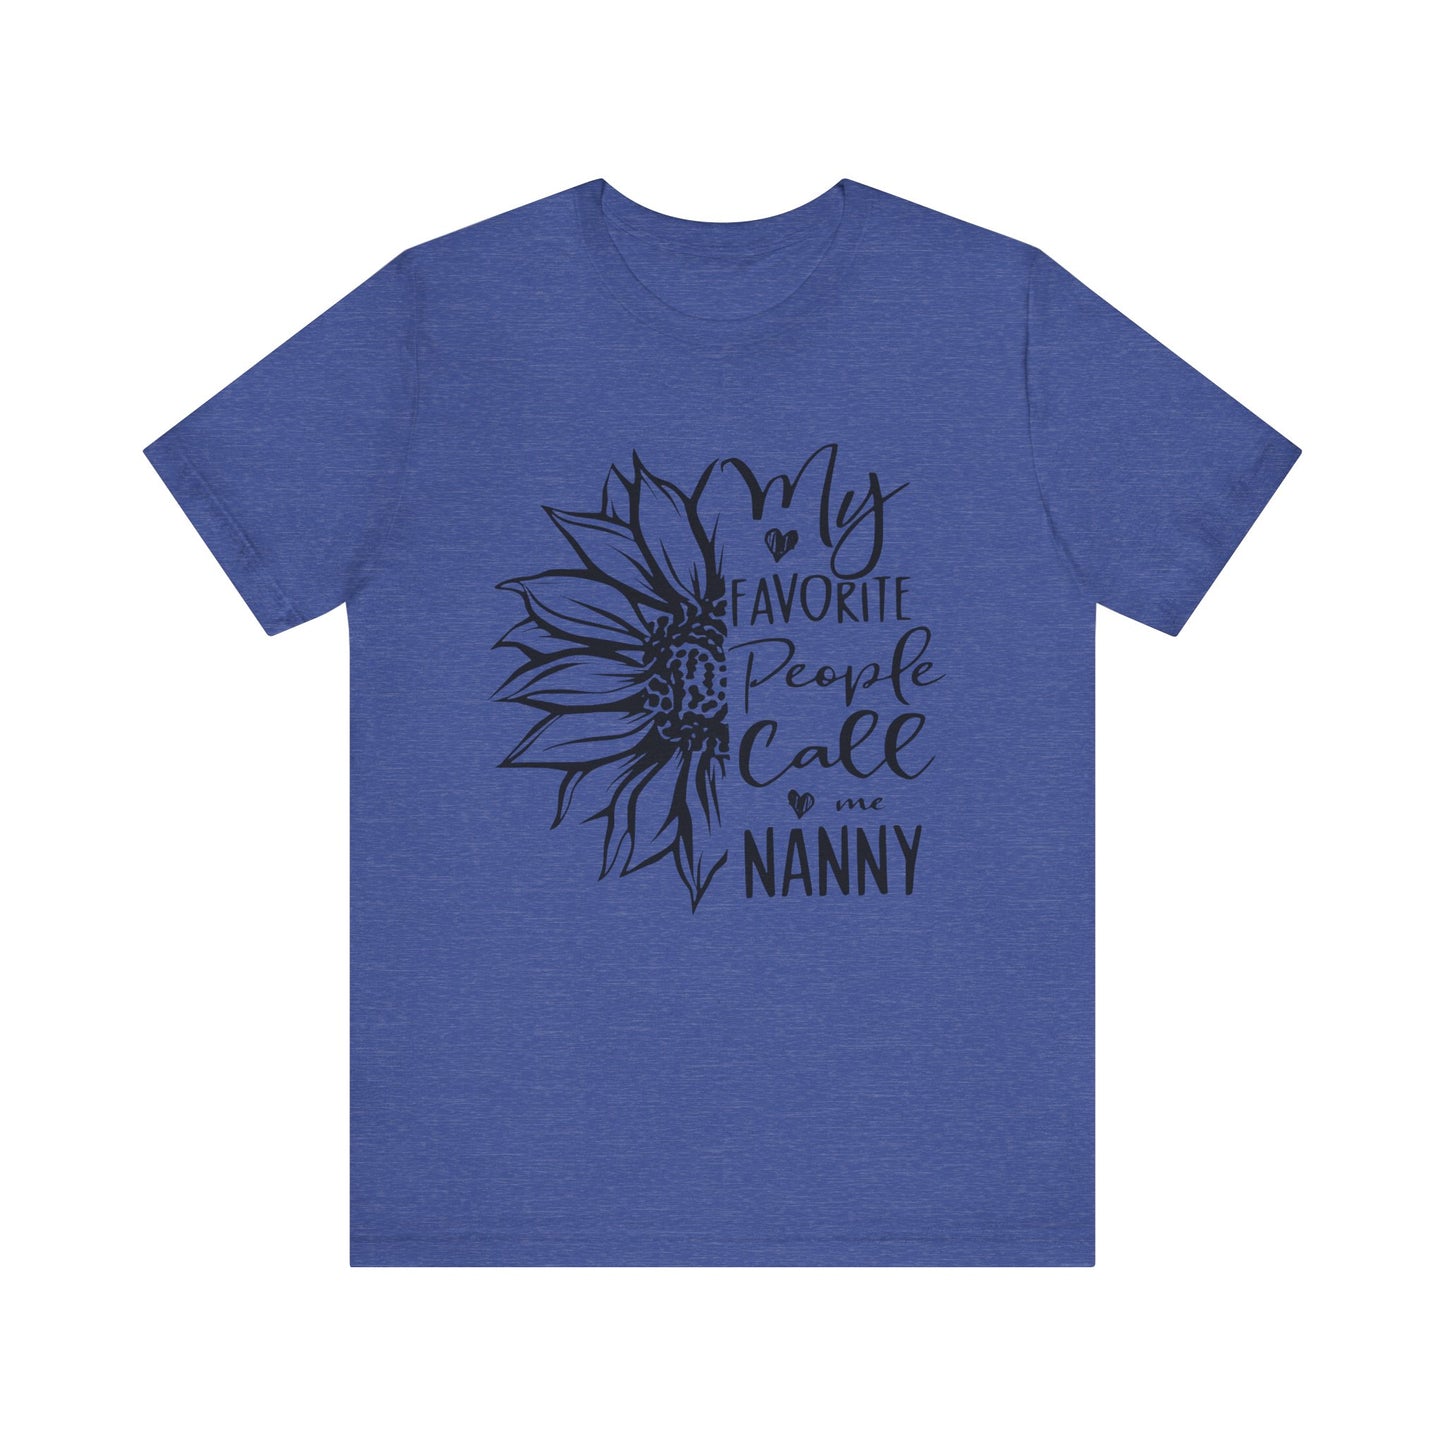 "Ethically Made Nanny T-Shirt with Tear-Away Label"